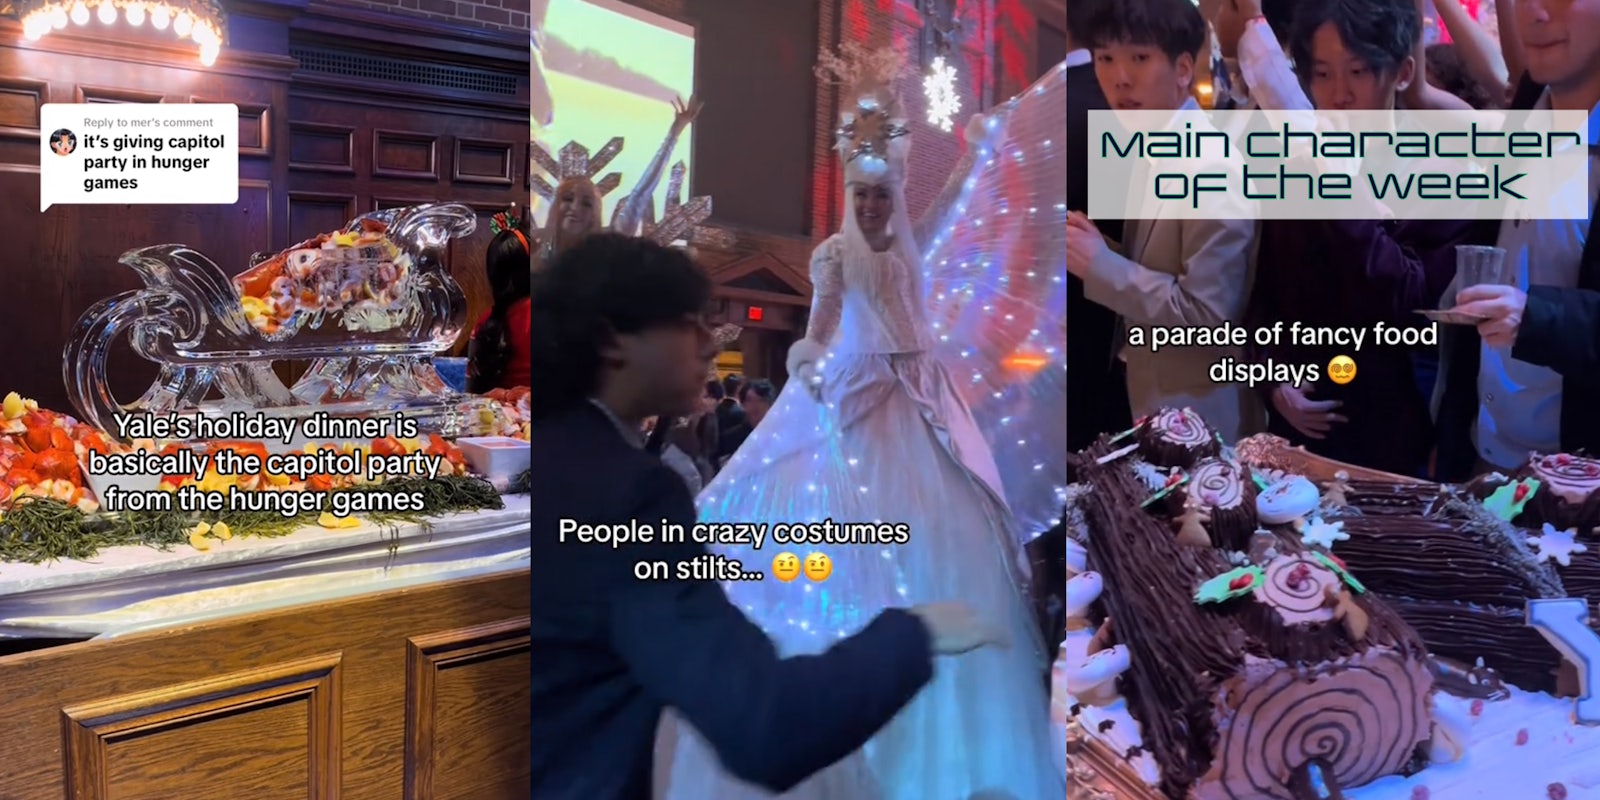 Screenshots from a TikTok showing Yale holiday party. In the top right corner is text that says 'Main Character of the Week' in a Daily Dot newsletter web_crawlr font.